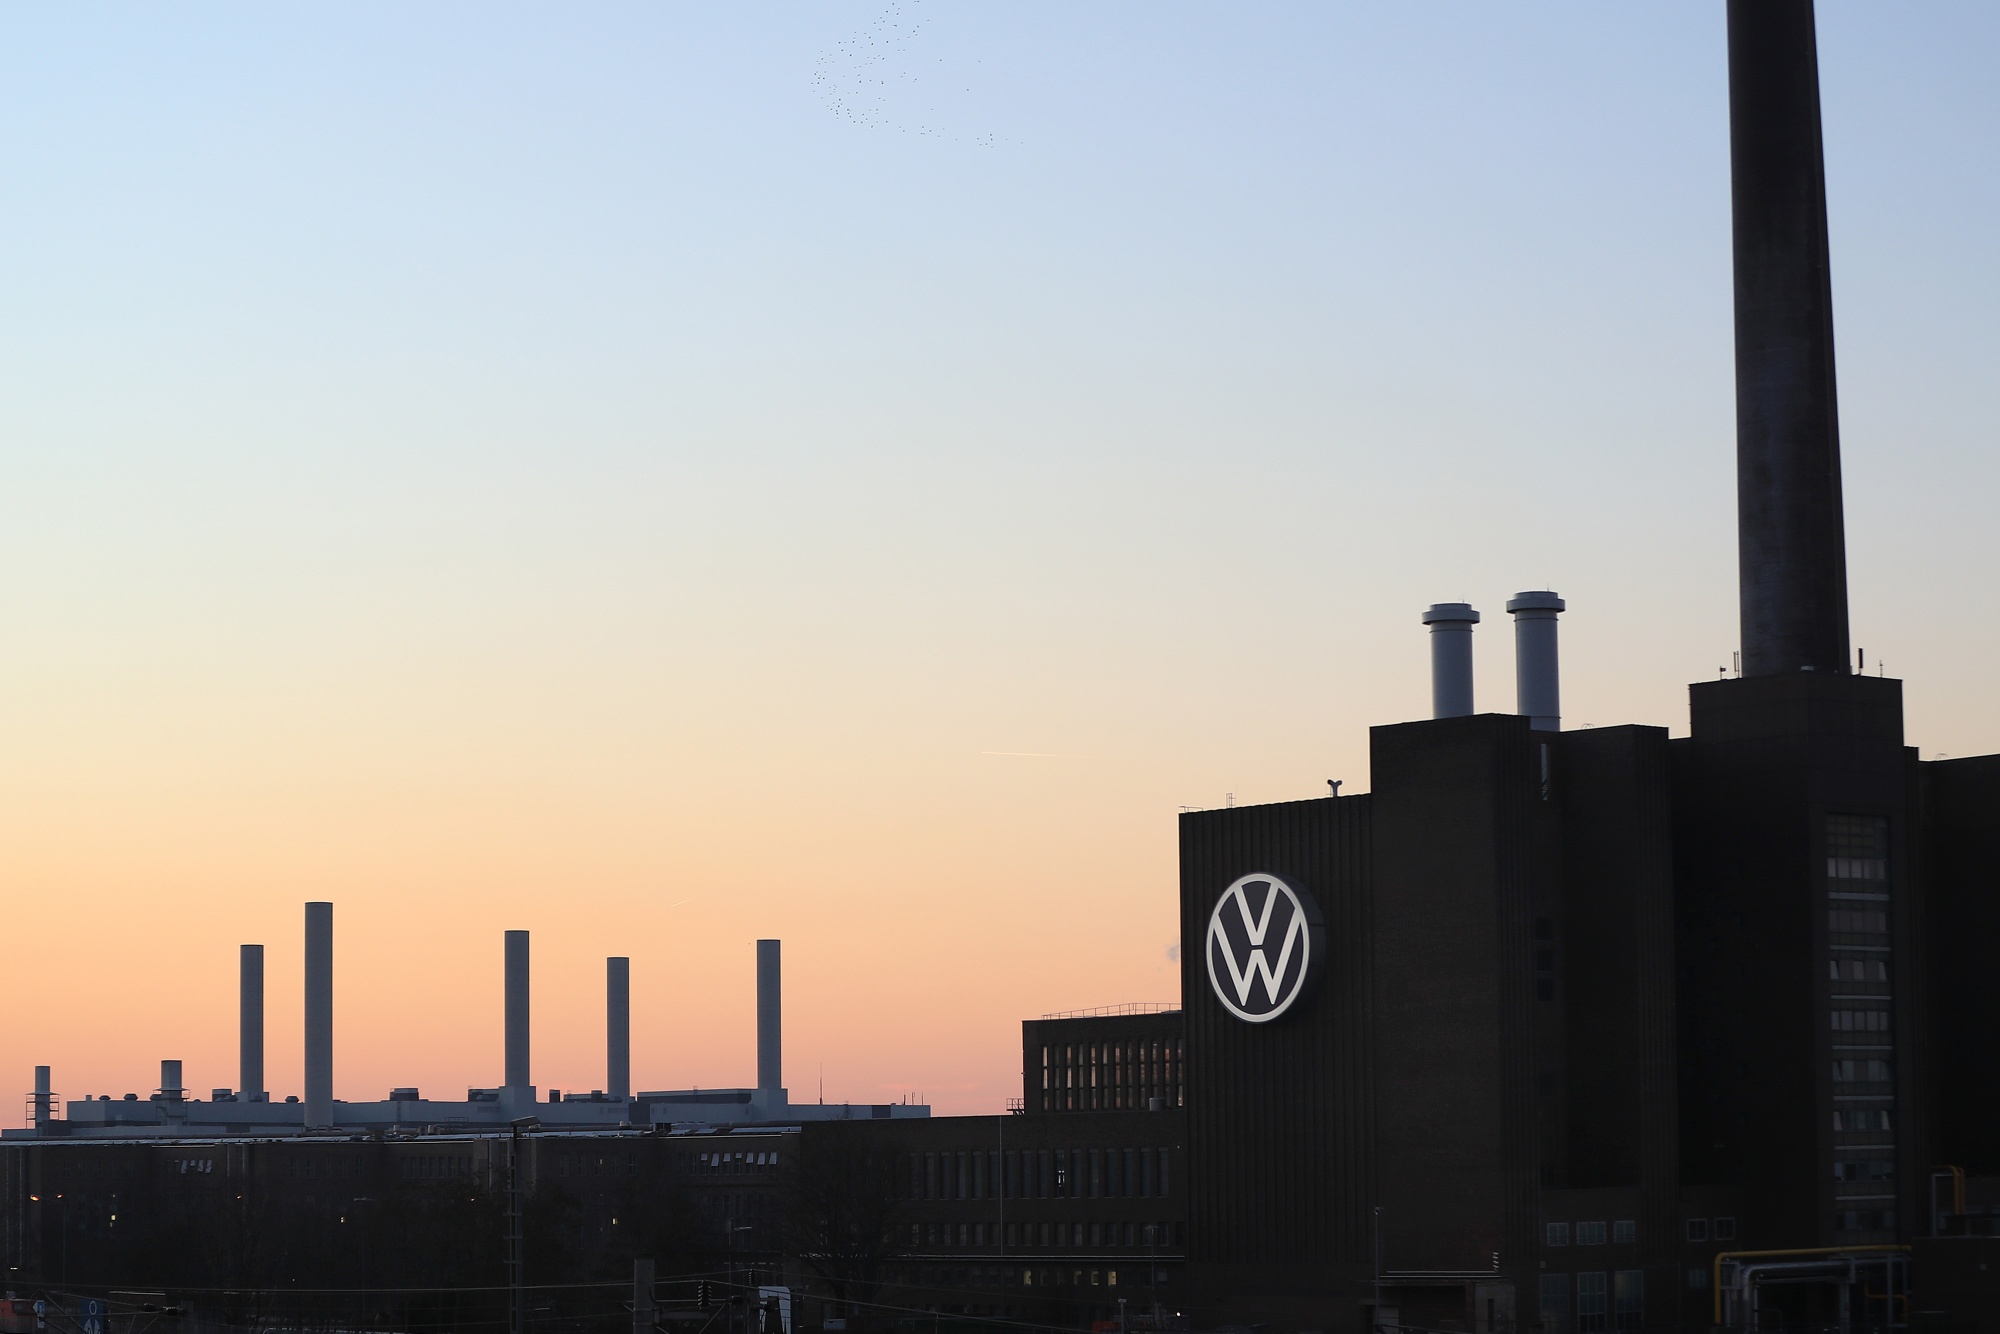 Volkswagen Set for MultimillionEuro Windfall on Huge Gas Trade Bloomberg